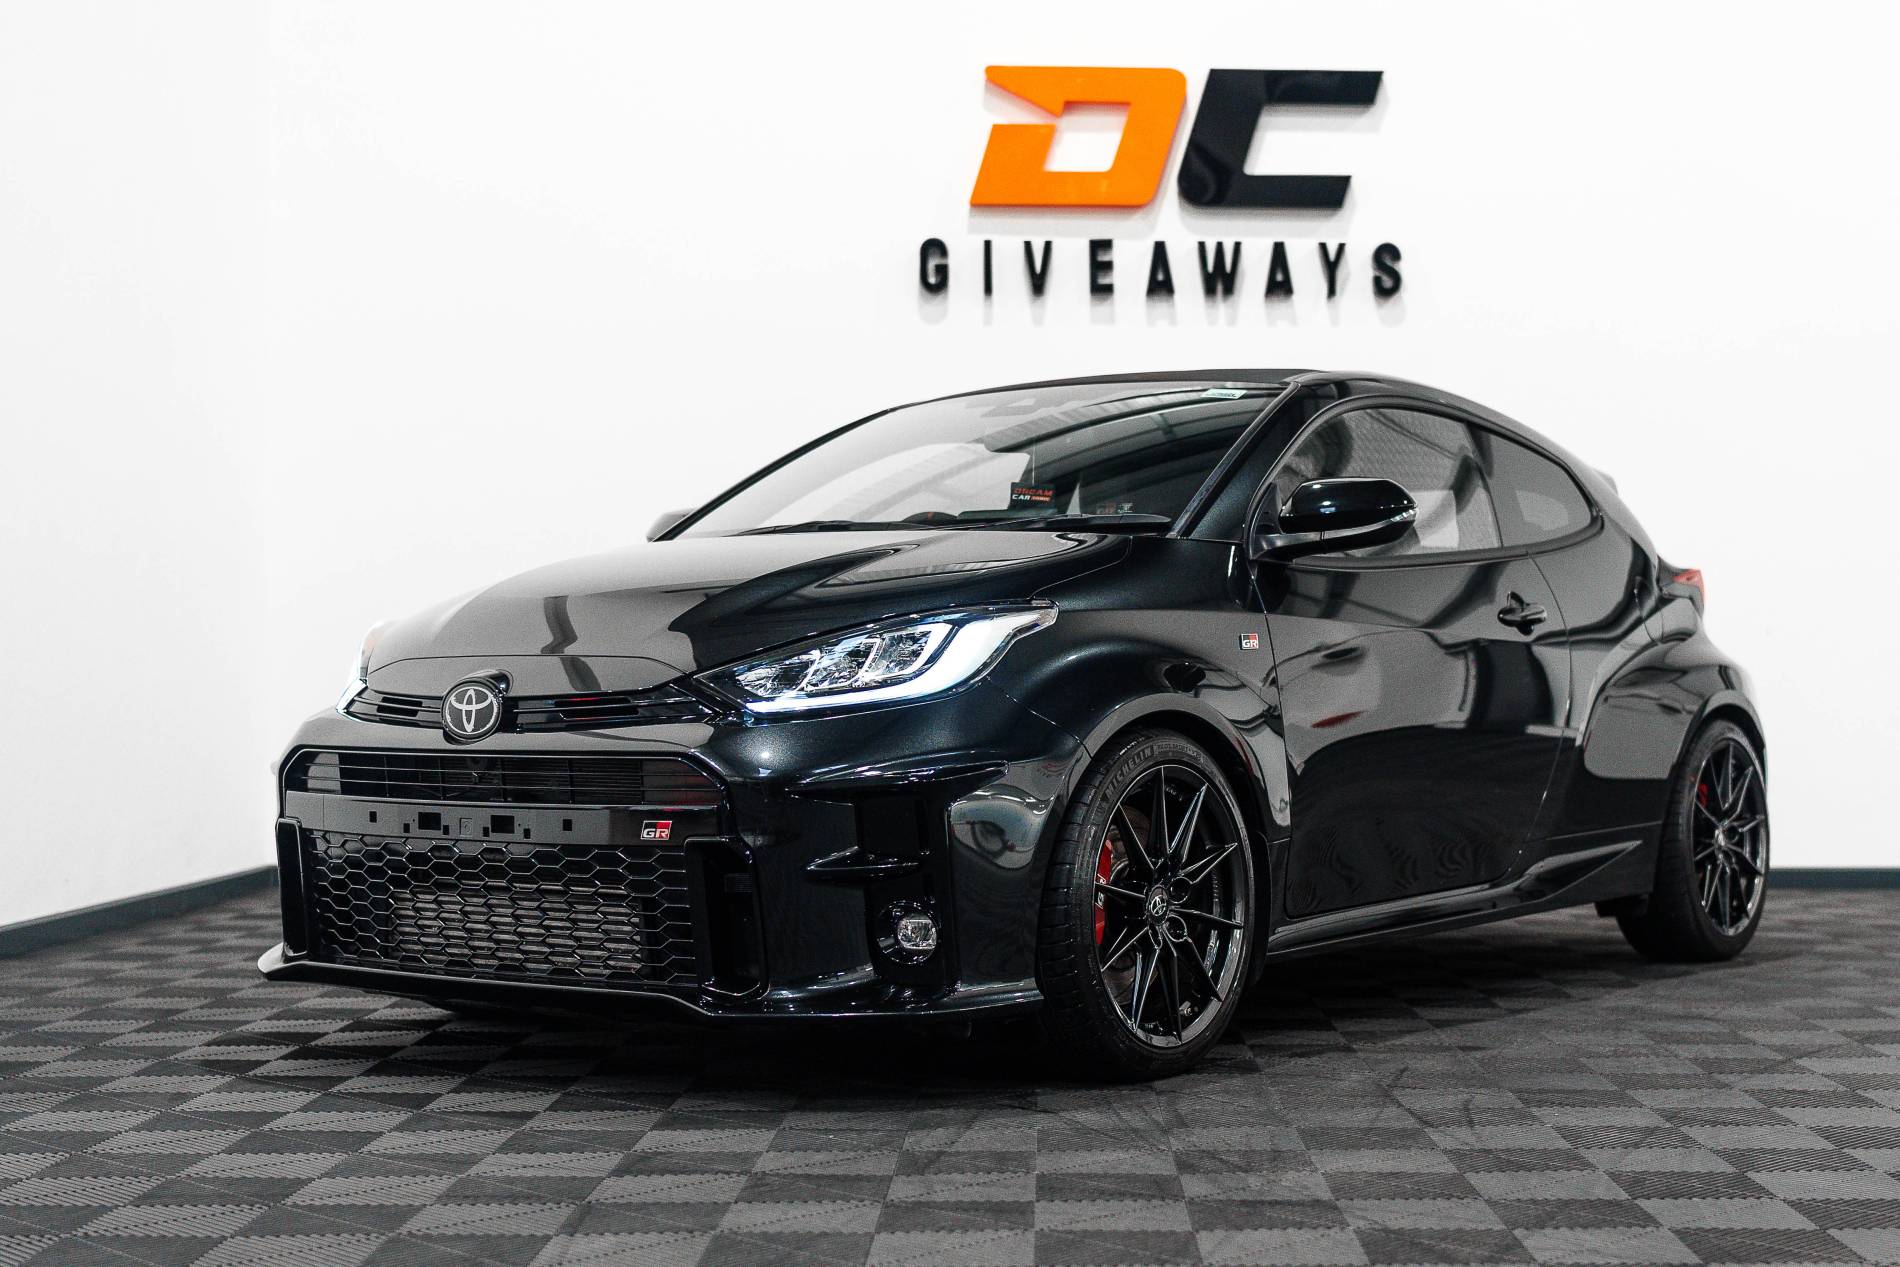 WIN INSTANTLY! 2000 Prizes / 4 Cars & £10,000 End Prize